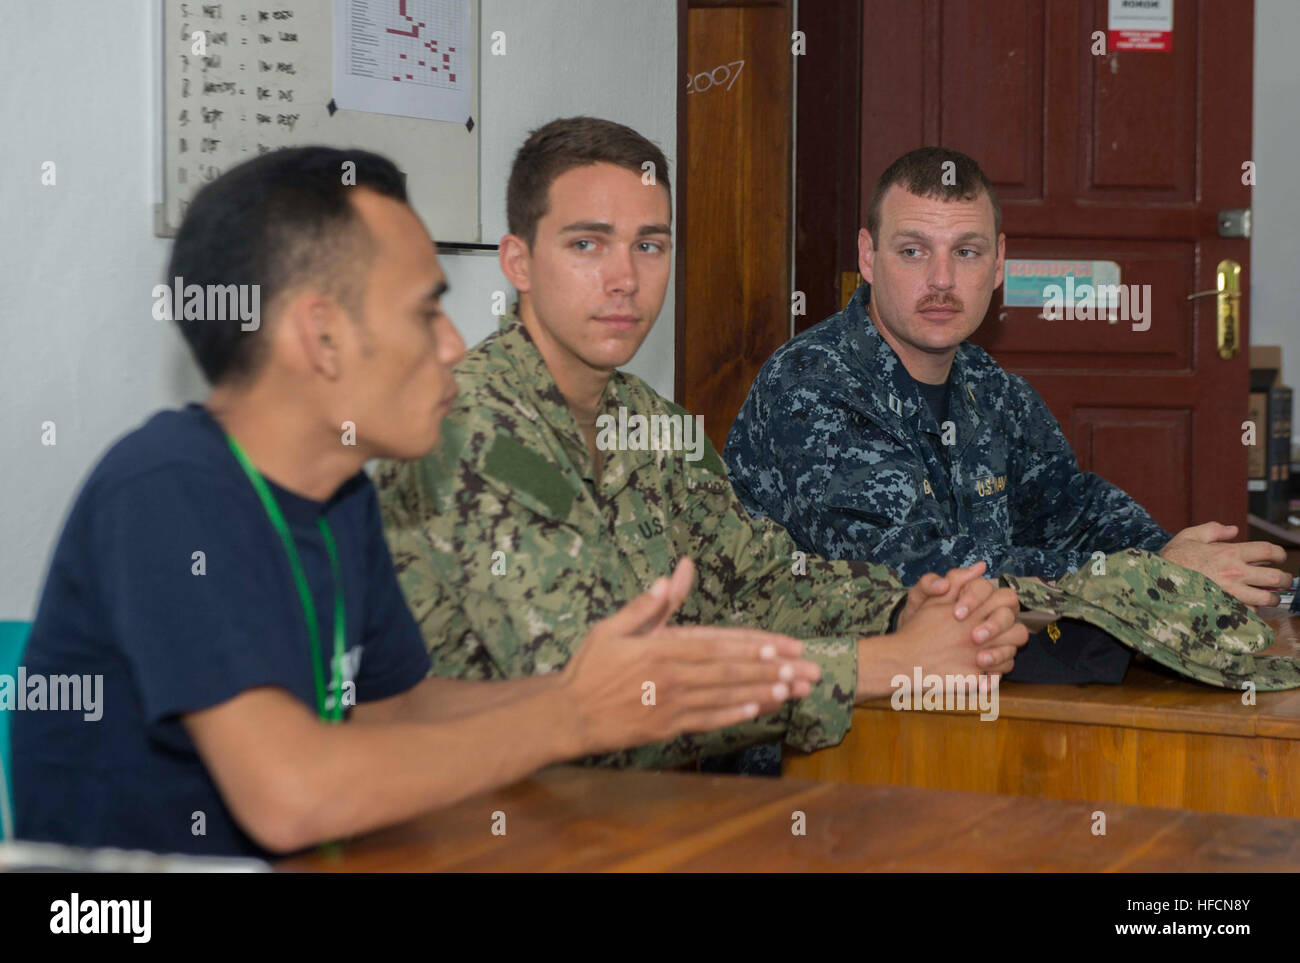 From right, U.S. Navy Lt. Marcus McDonough, assigned to the Navy Entomology Center of Excellence, and Hospital Corpsman 2nd Class Dylan Rich, assigned to Navy Environmental and Preventive Medicine Unit 6, listen as Jimi Mane, a translator for Hope Worldwide, a nongovernmental organization, translates a question during an entomology subject matter expert exchange as part of Pacific Partnership 2014 in Ba'a, Indonesia, June 4, 2014. Pacific Partnership is an annual deployment of forces designed to strengthen maritime and humanitarian partnerships during disaster relief operations, while providin Stock Photo